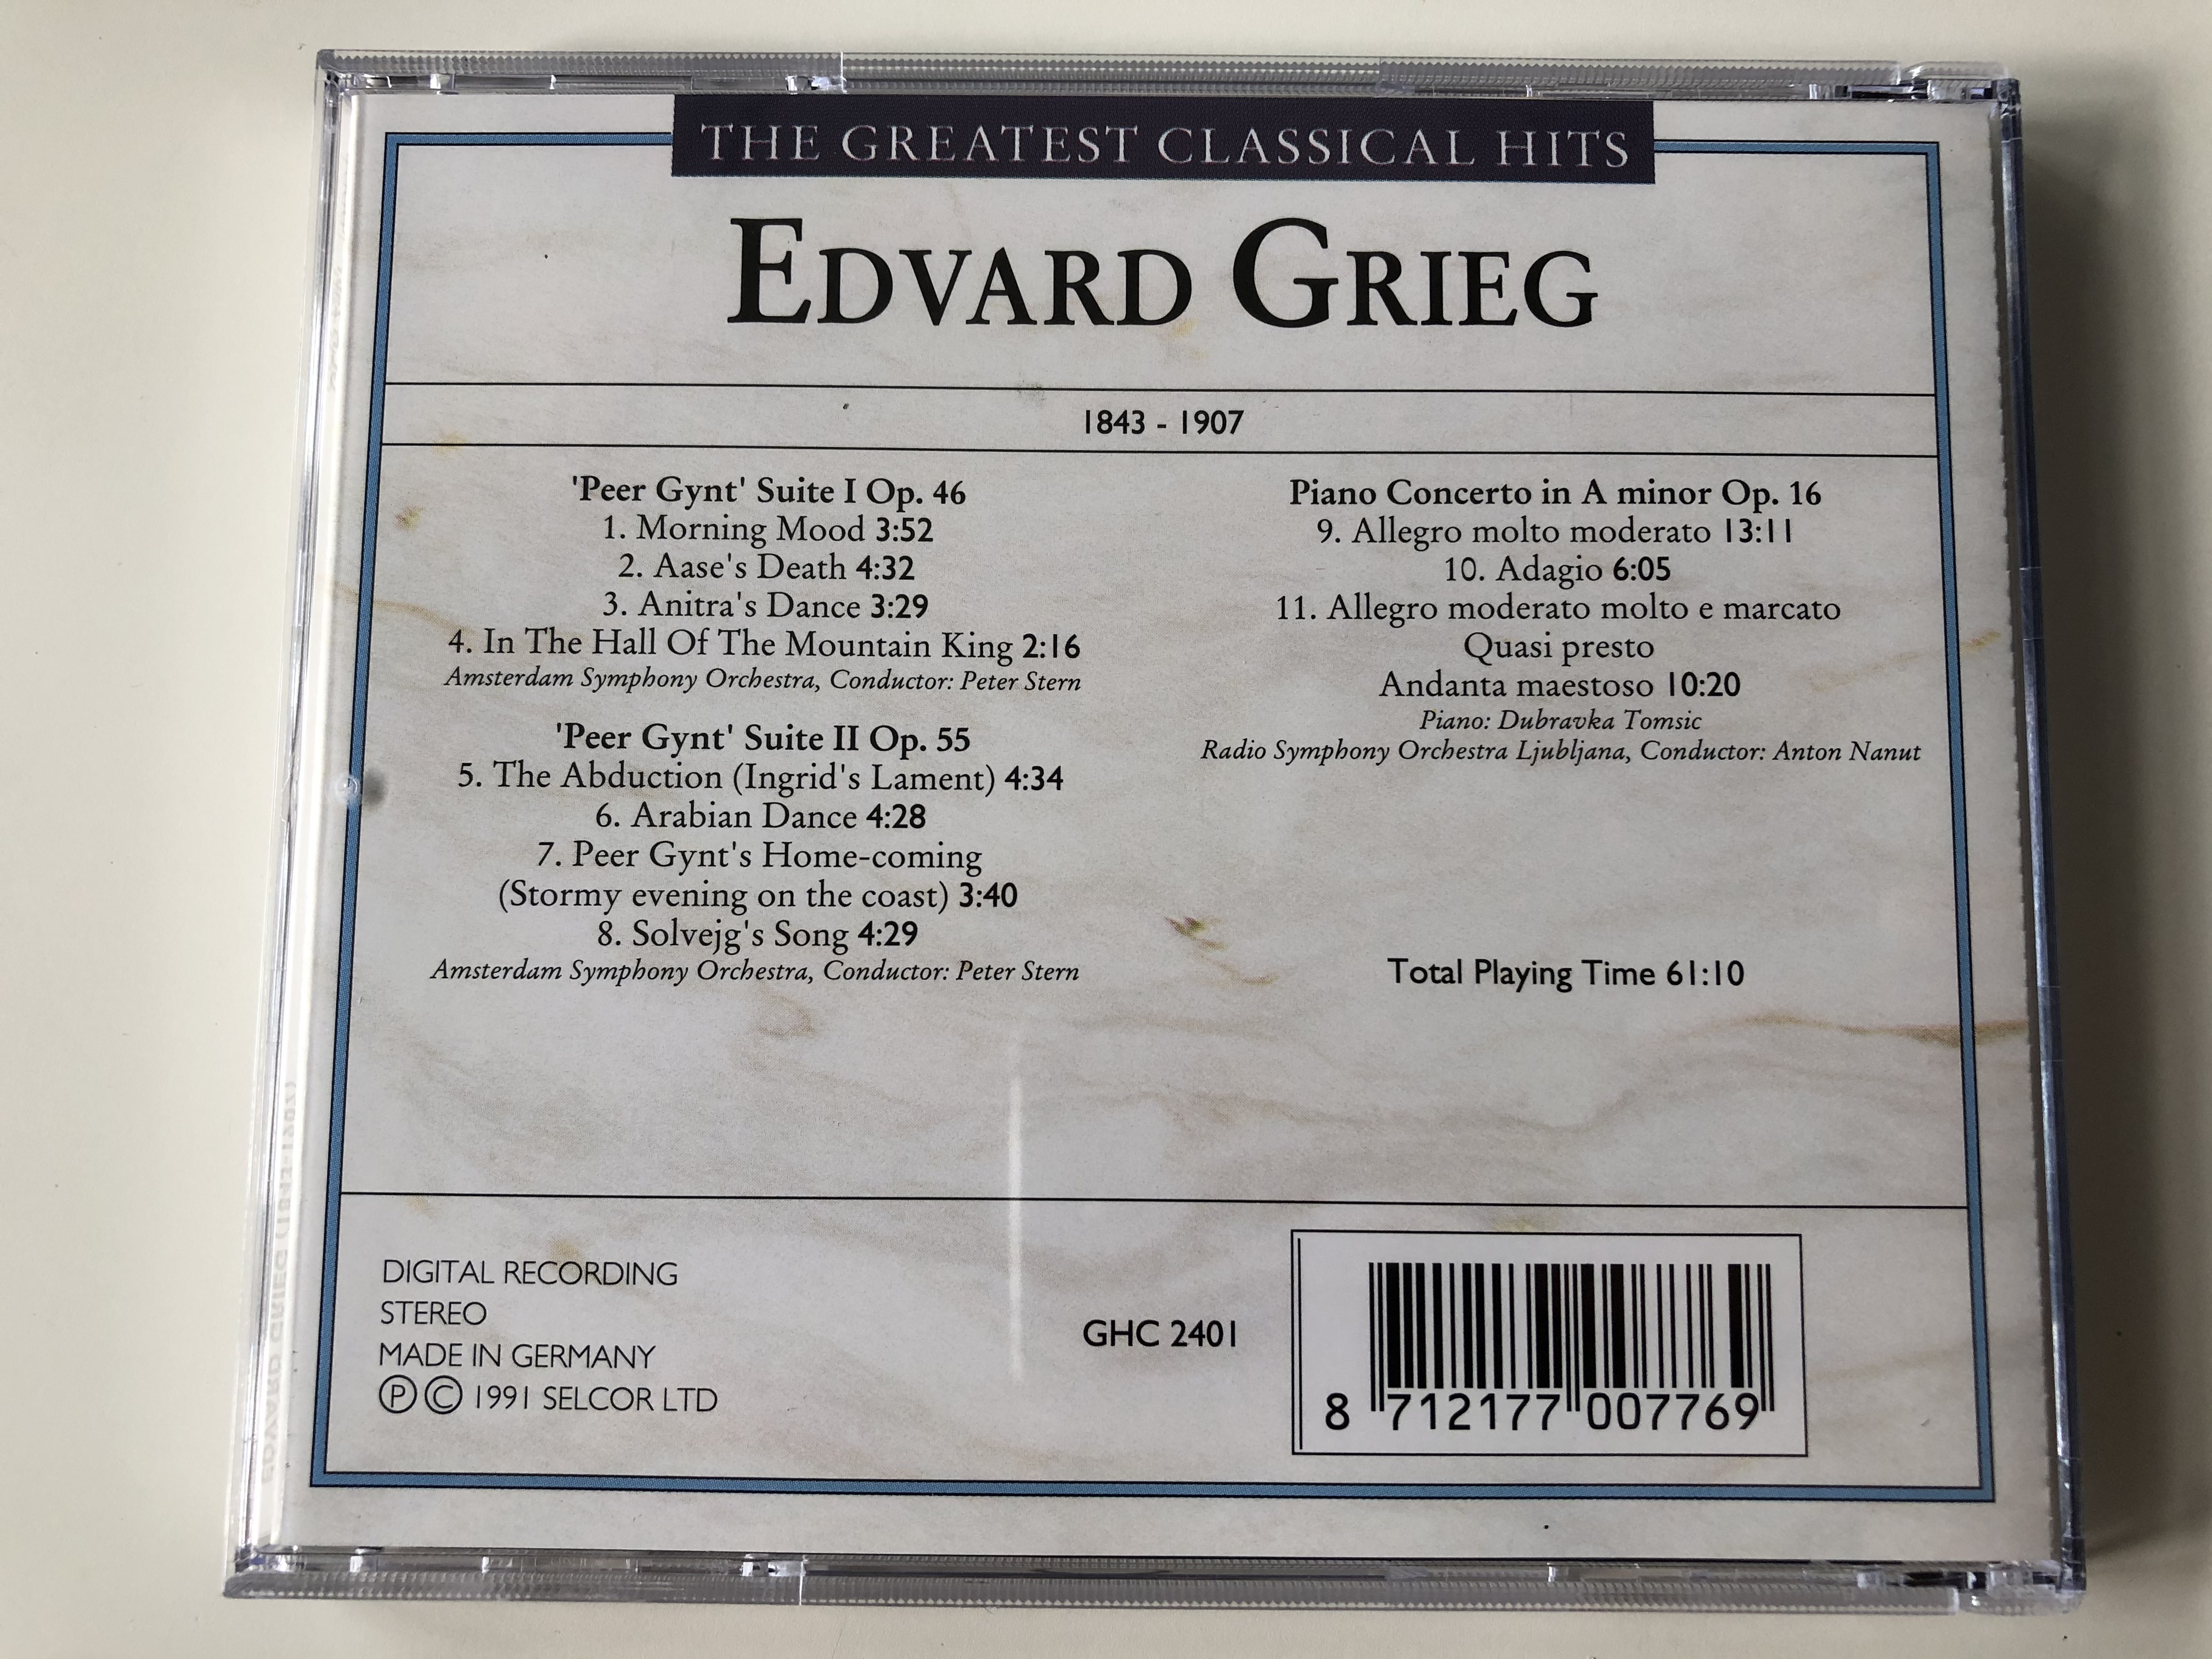 the-greatest-classical-hits-grieg-peer-gynt-suite-i-op.-46-peer-gynt-suite-ii-op.-55-piano-concerto-in-a-minor-op.-16-selcor-ltd.-audio-cd-1991-stereo-gch-2401-4-.jpg